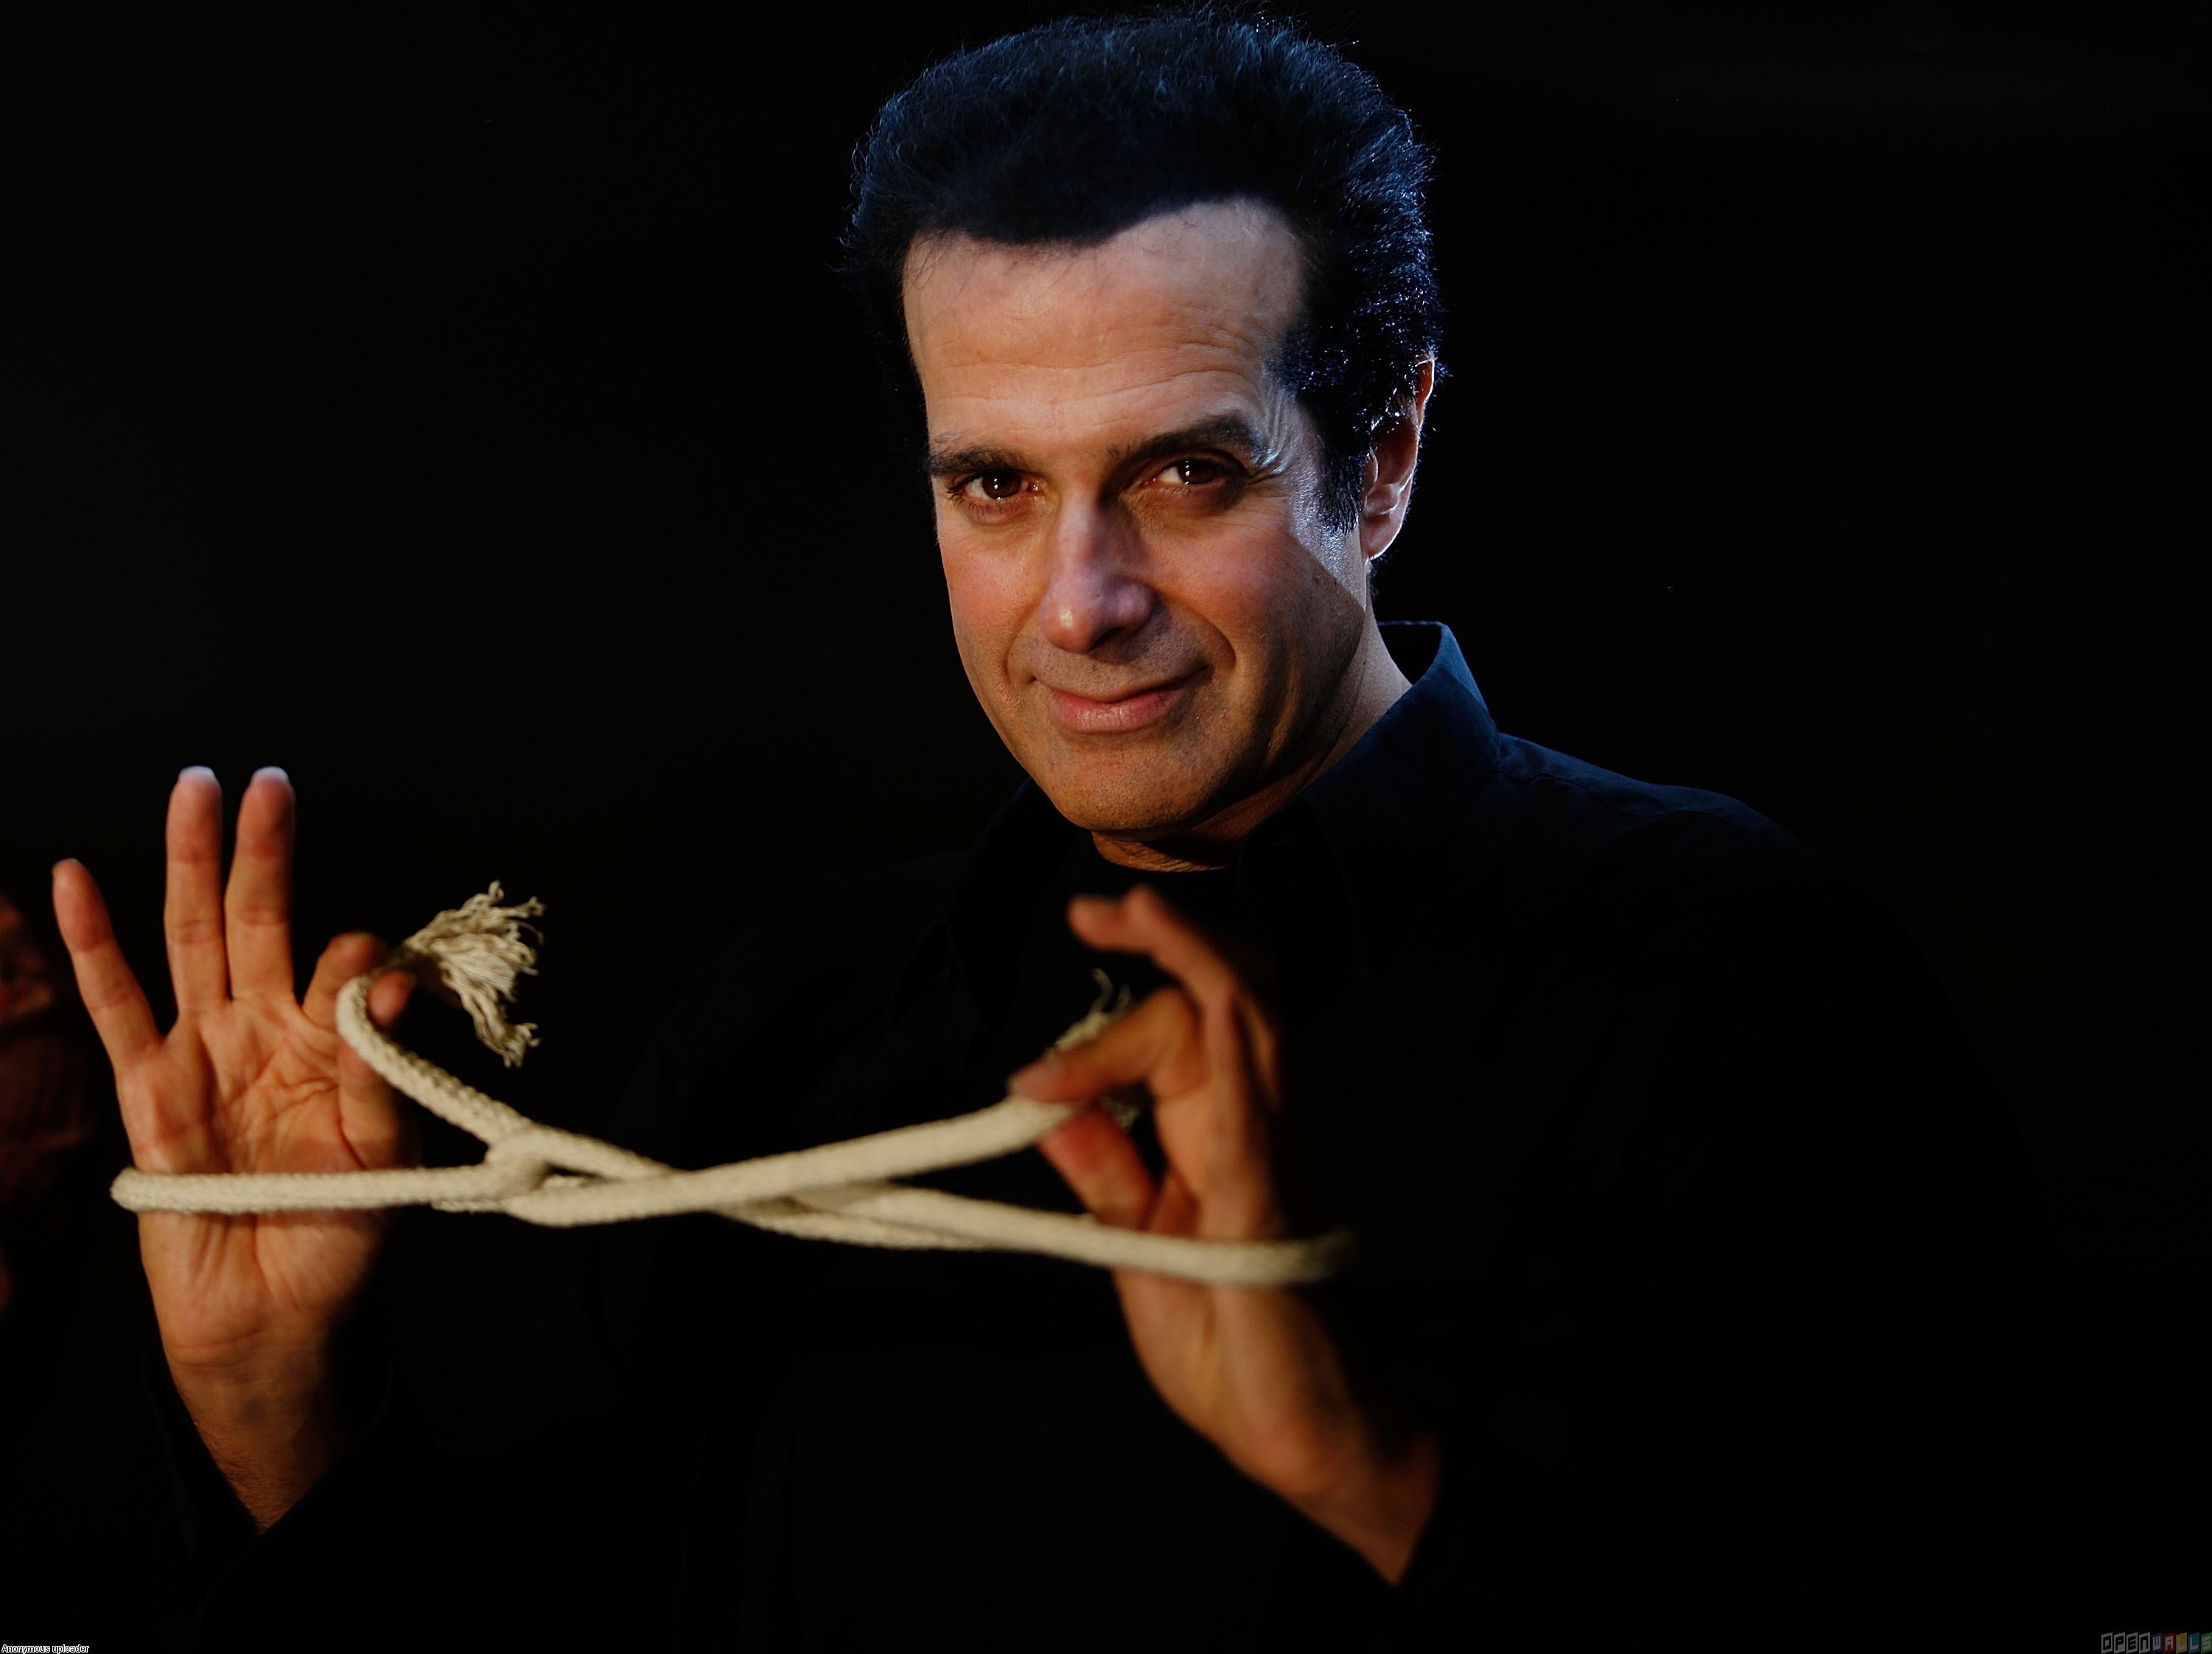 images-of-david-copperfield-illusionist